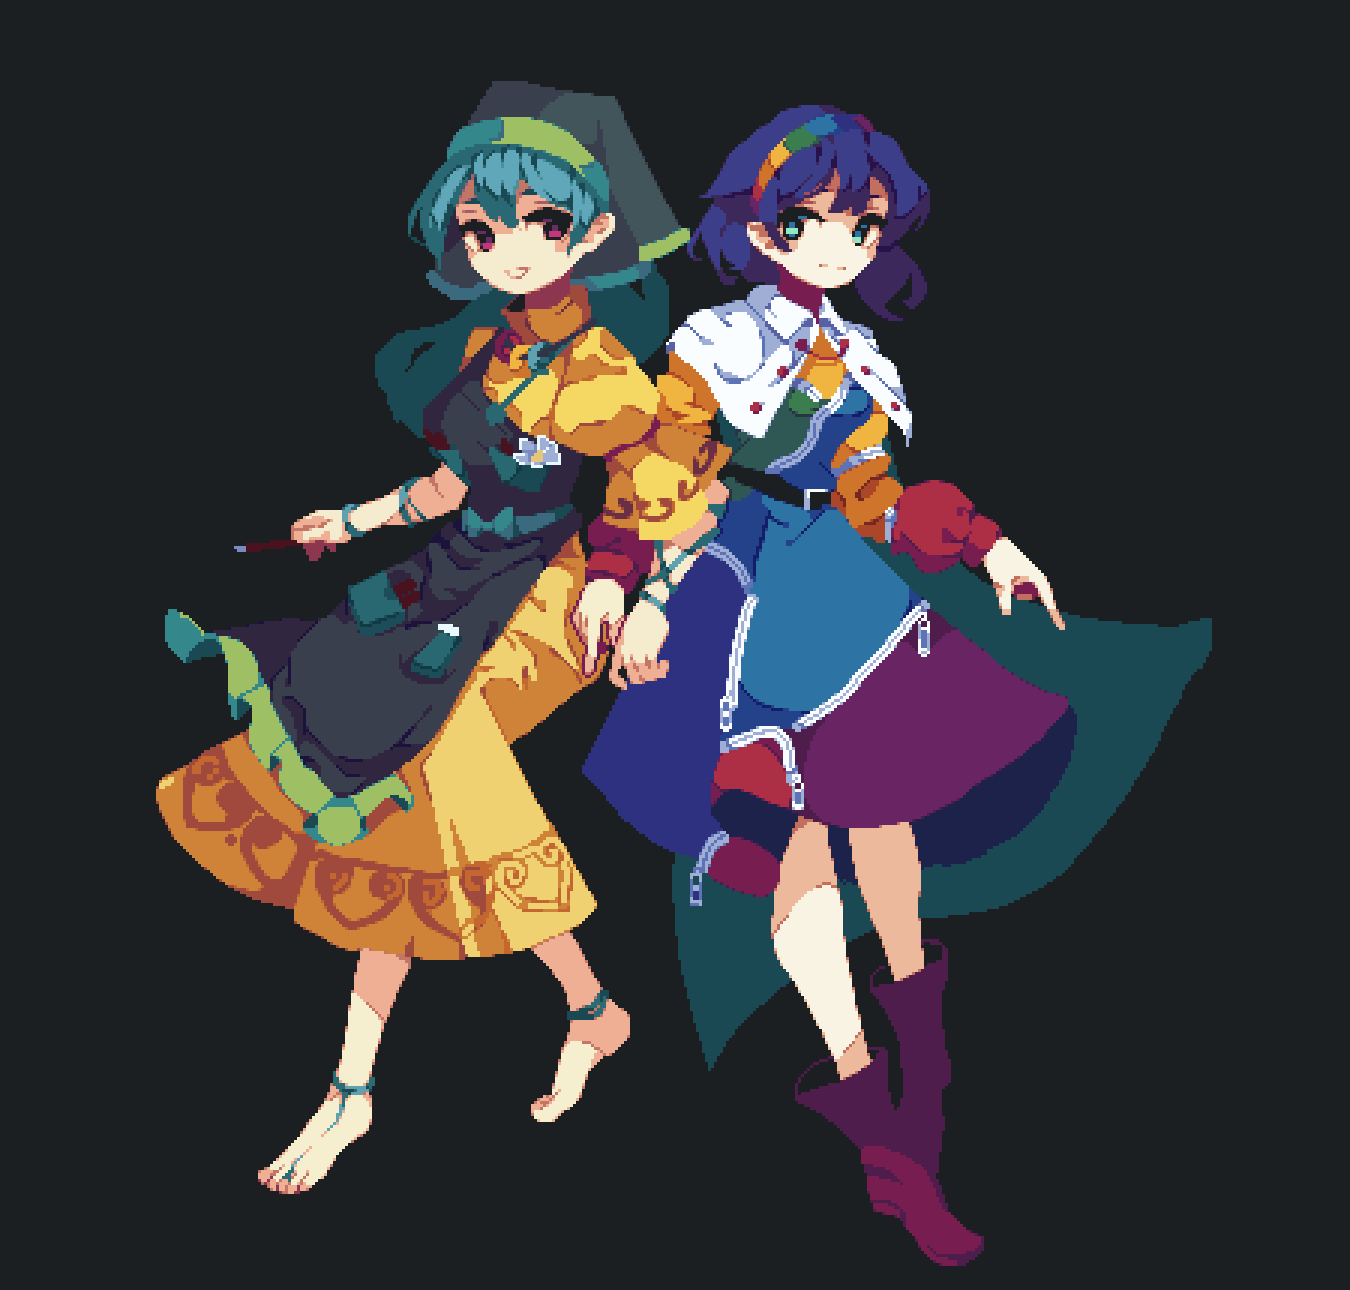 2girls 4qw5 apron blue_hair boots cape dress green_apron green_headwear haniyasushin_keiki head_scarf highres jewelry knife long_hair magatama magatama_necklace multicolored_clothes multicolored_hairband multiple_girls necklace paintbrush patchwork_clothes pink_eyes pink_footwear pixel_art pliers rainbow_gradient short_hair single_strap sky_print tenkyuu_chimata tools touhou violet_eyes yellow_dress zipper